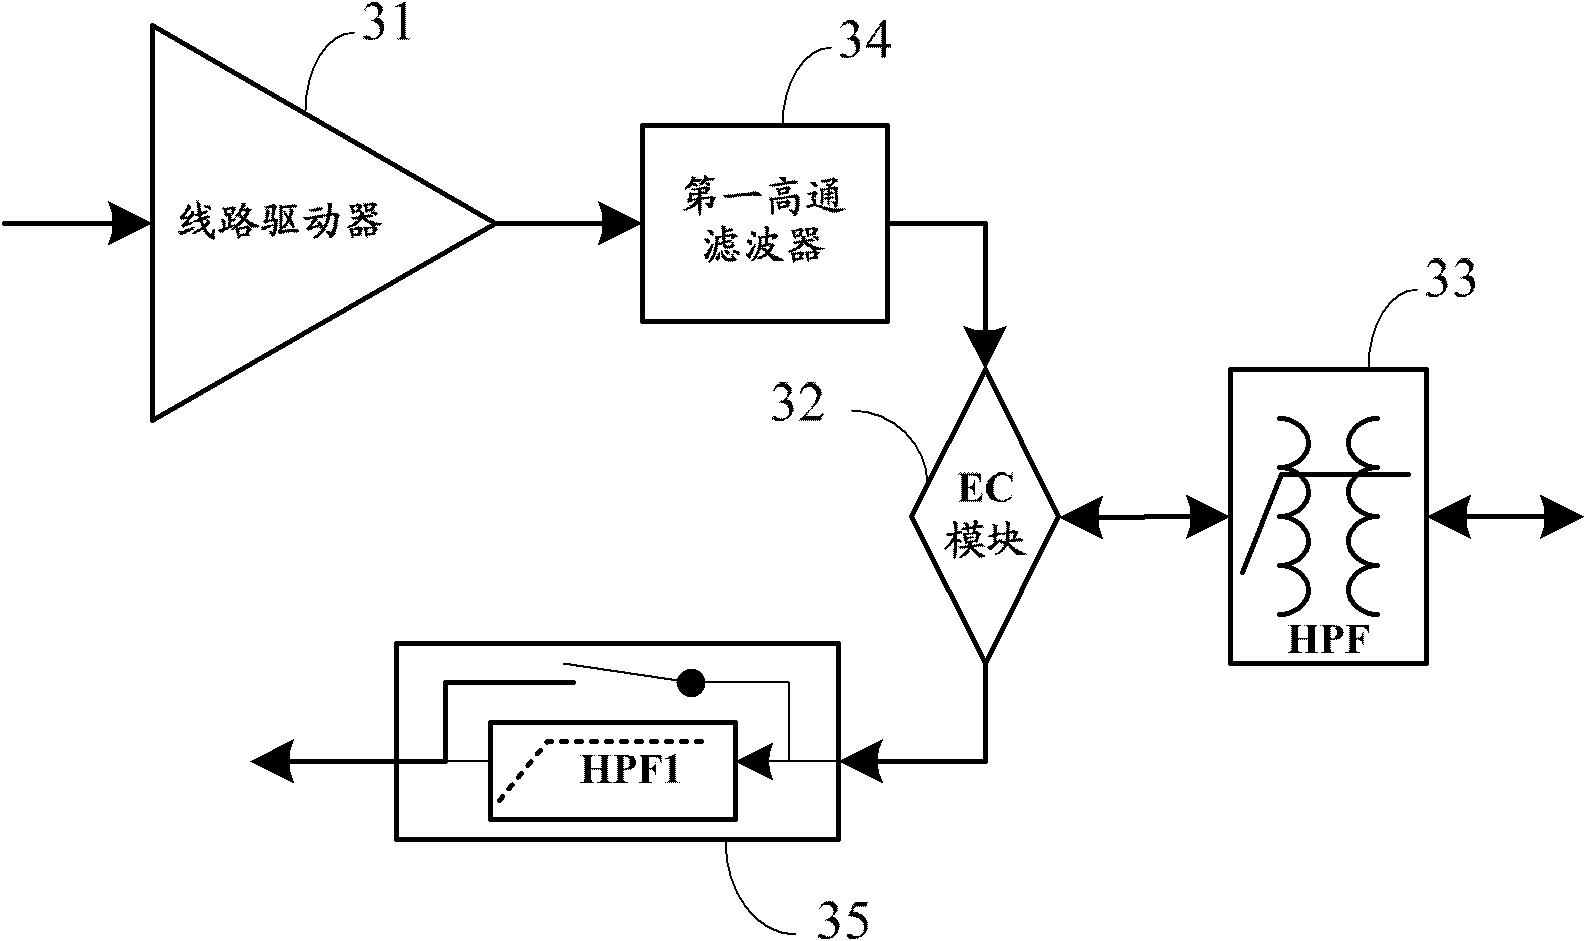 Circuit and equipment of digital subscriber line